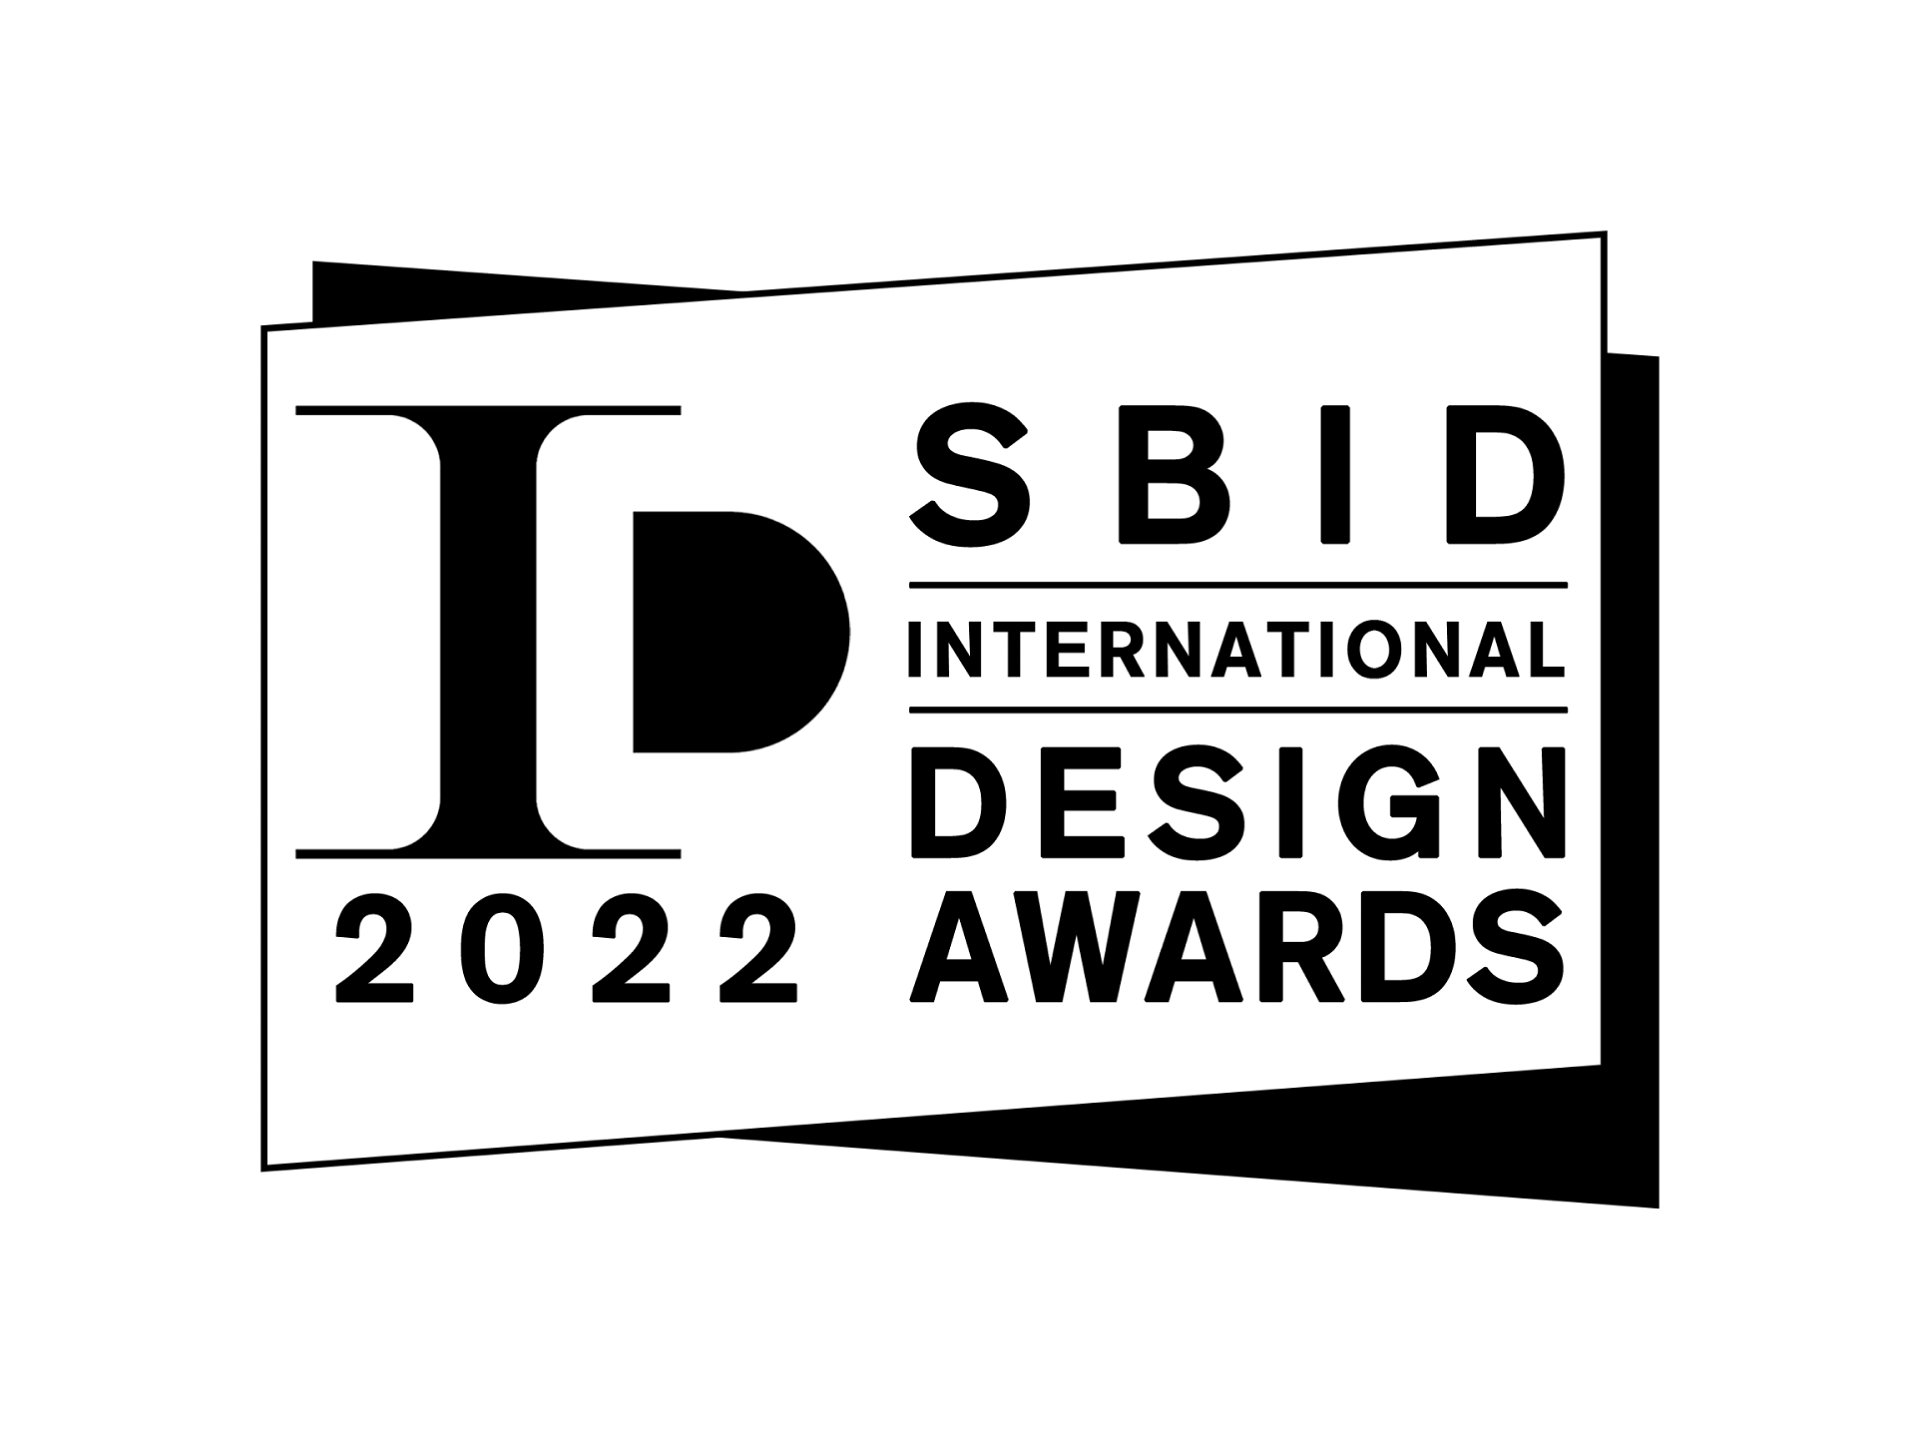 The SBID International Design Awards is Open for 2022 Entries! Love